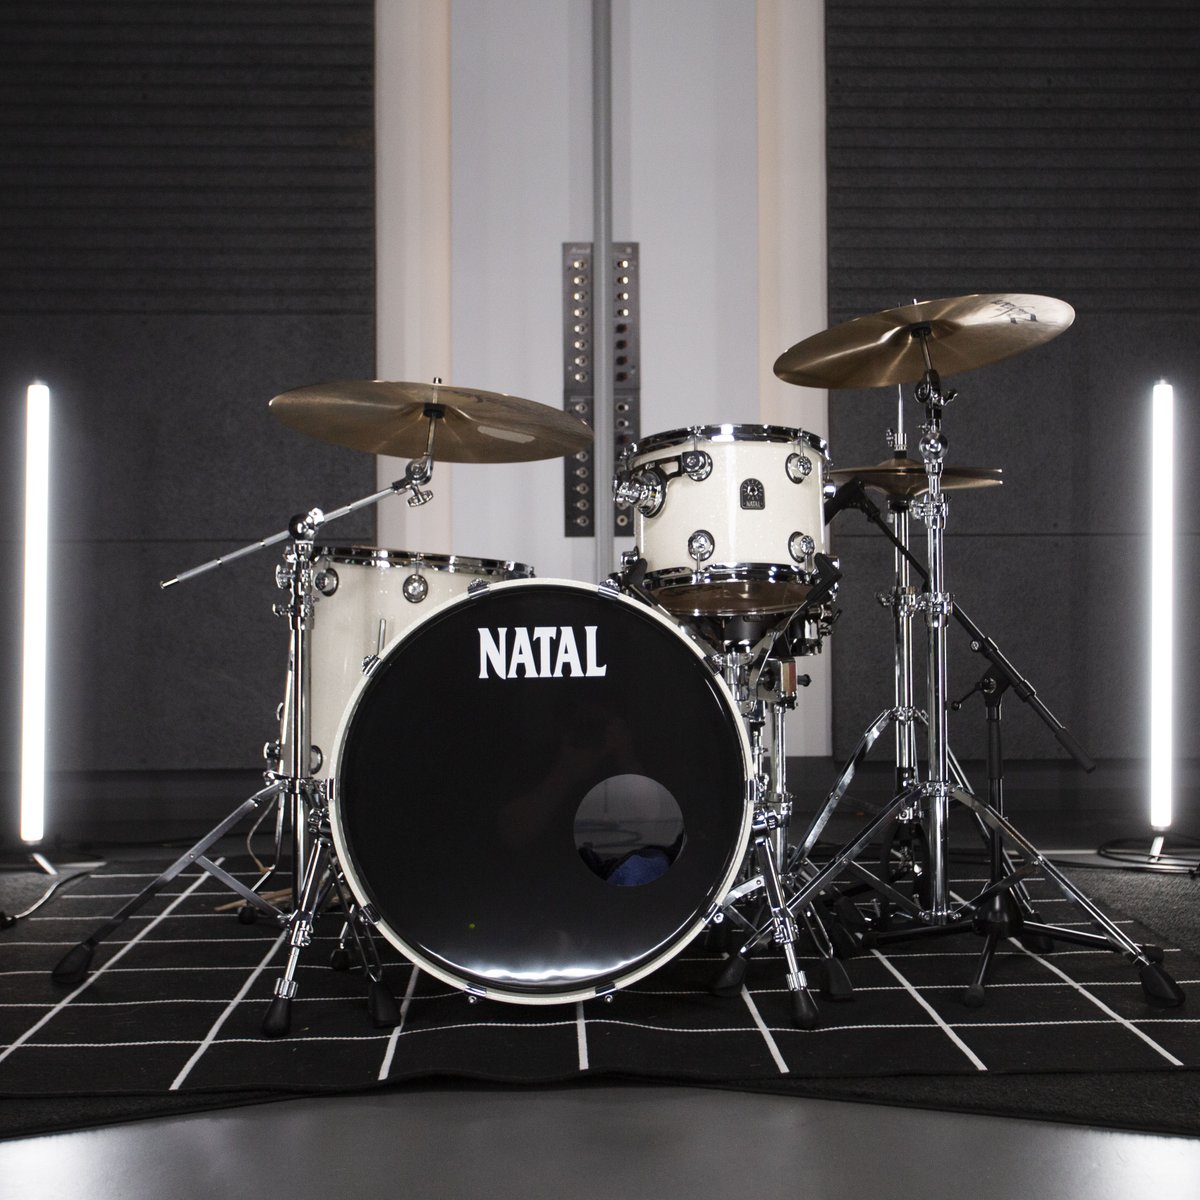 Boasting natural wood and natural sound, have you experienced the warmth and well rounded tone of our Maple originals? 😍 #NatalDrums